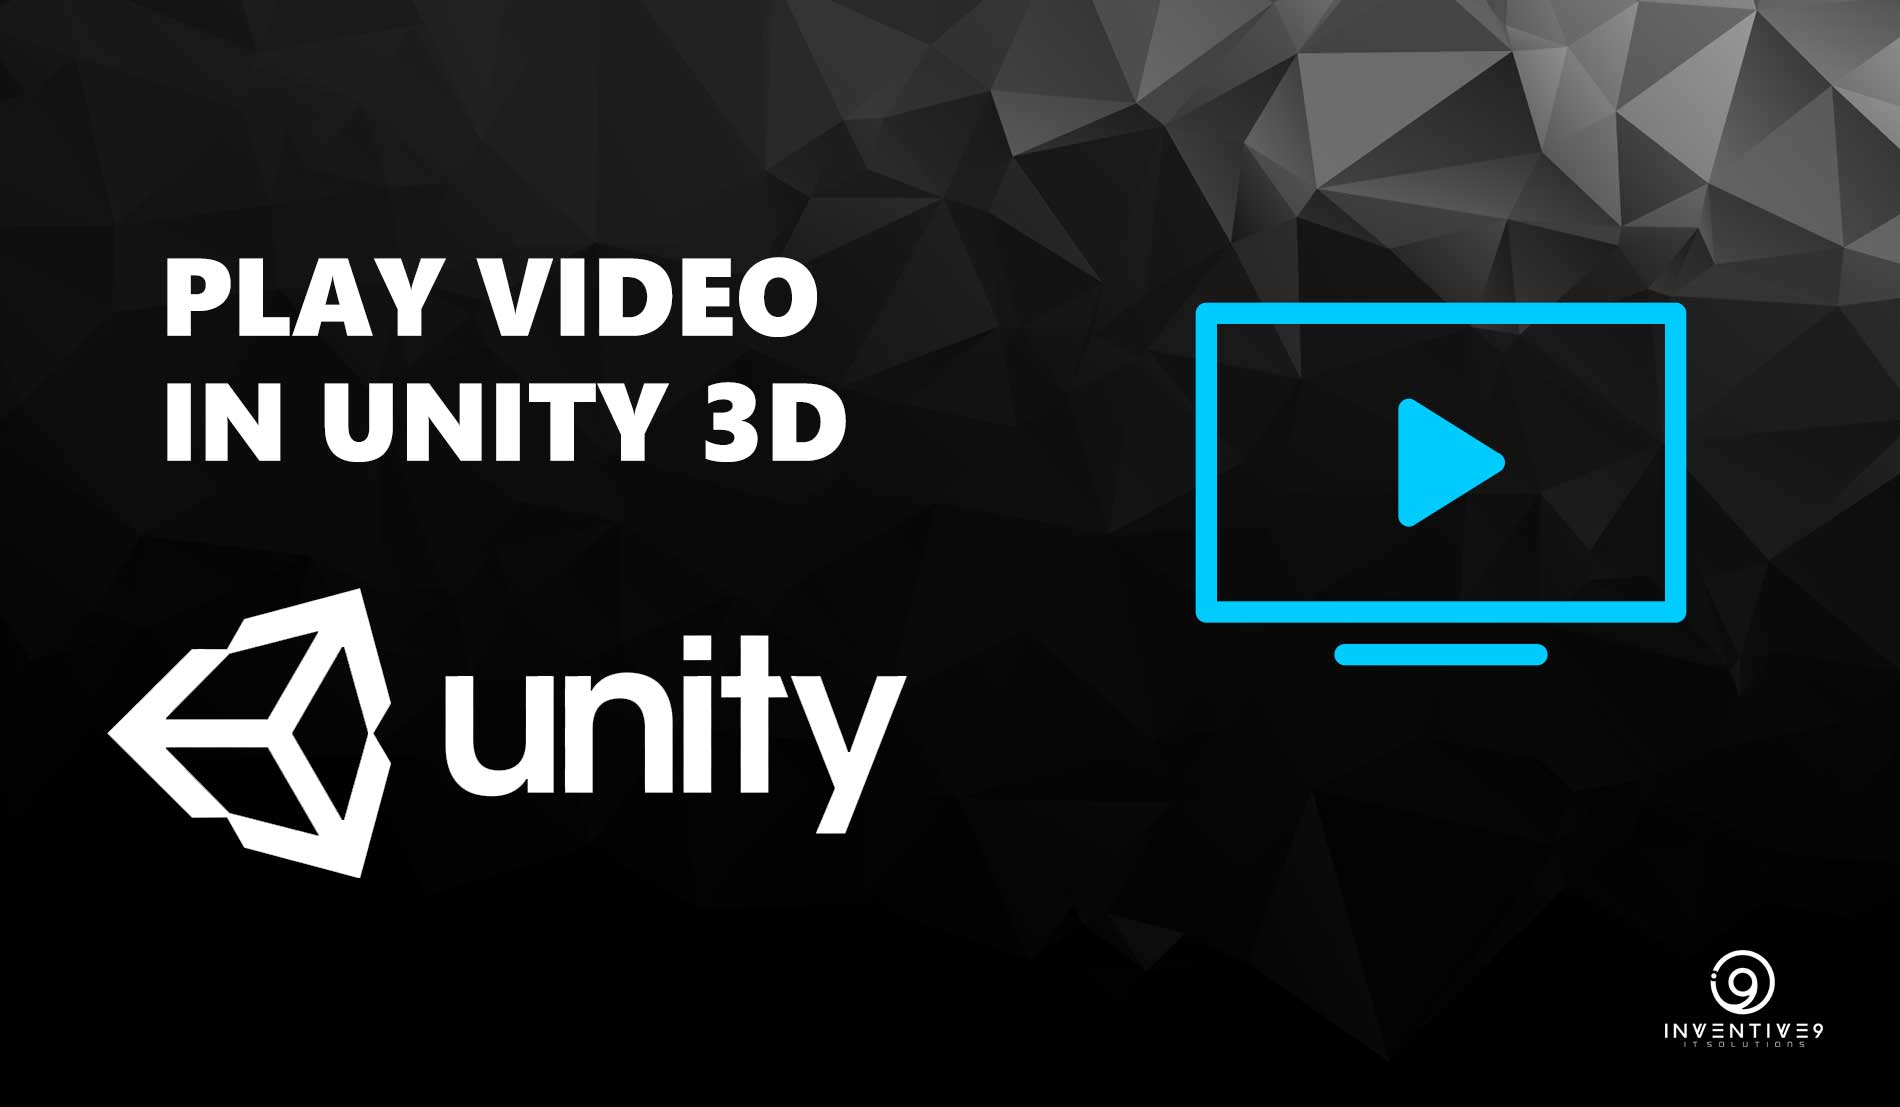 Play video in Unity